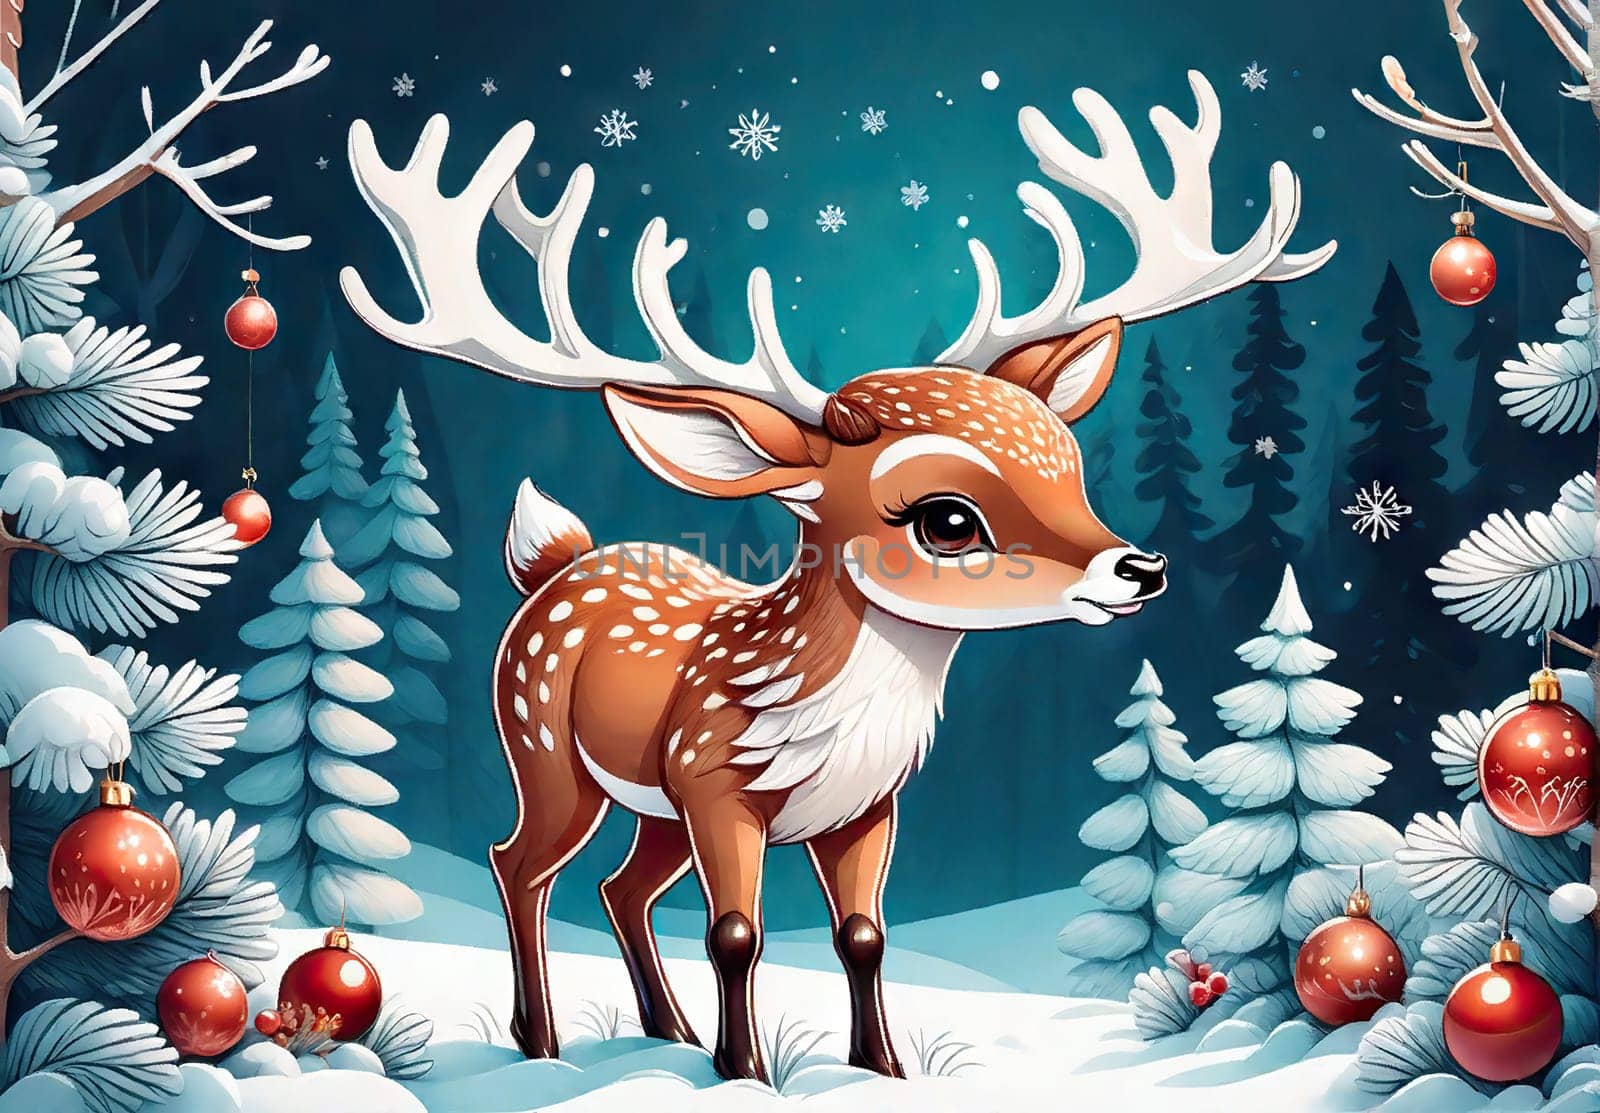 Merry Christmas and happy new year greeting card with cute deer. Holiday cartoon character in winter season.